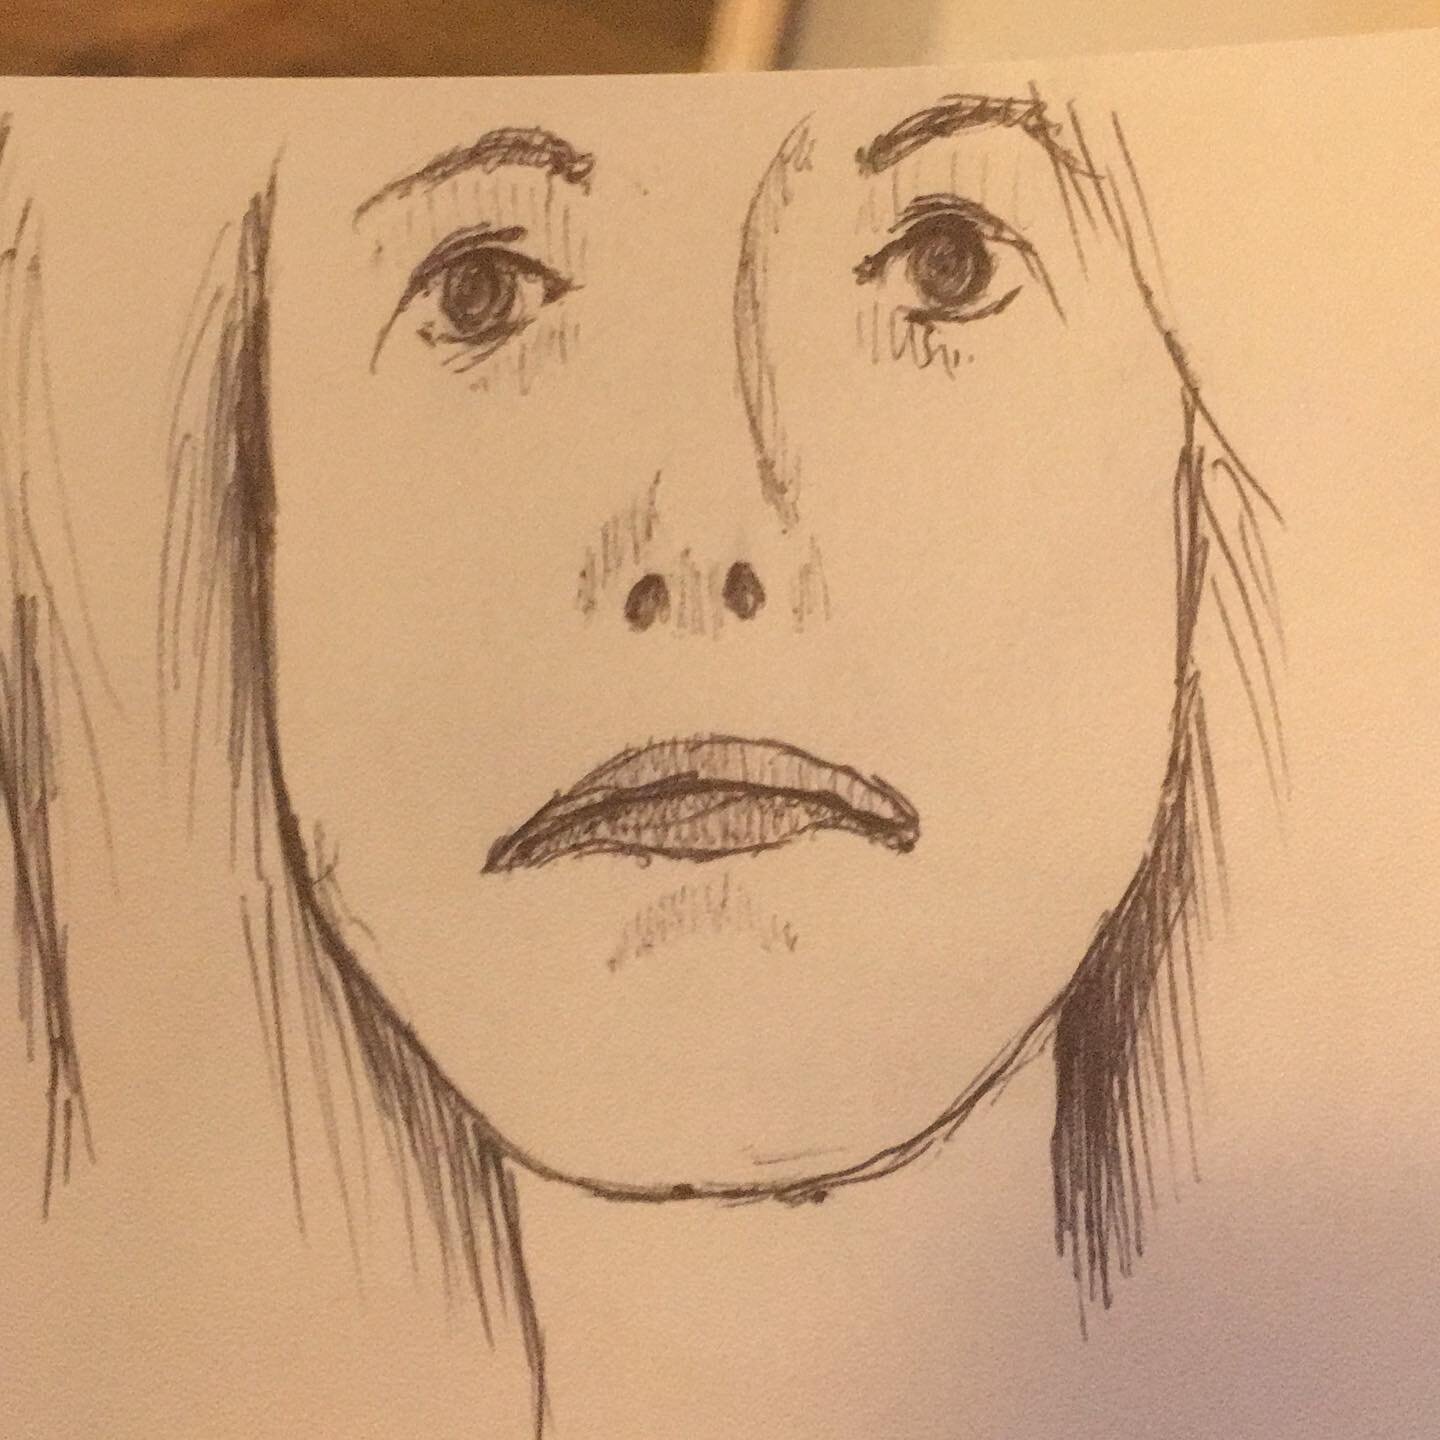 Need to remember to draw downturned lips from time to time. Seems to work out ok.